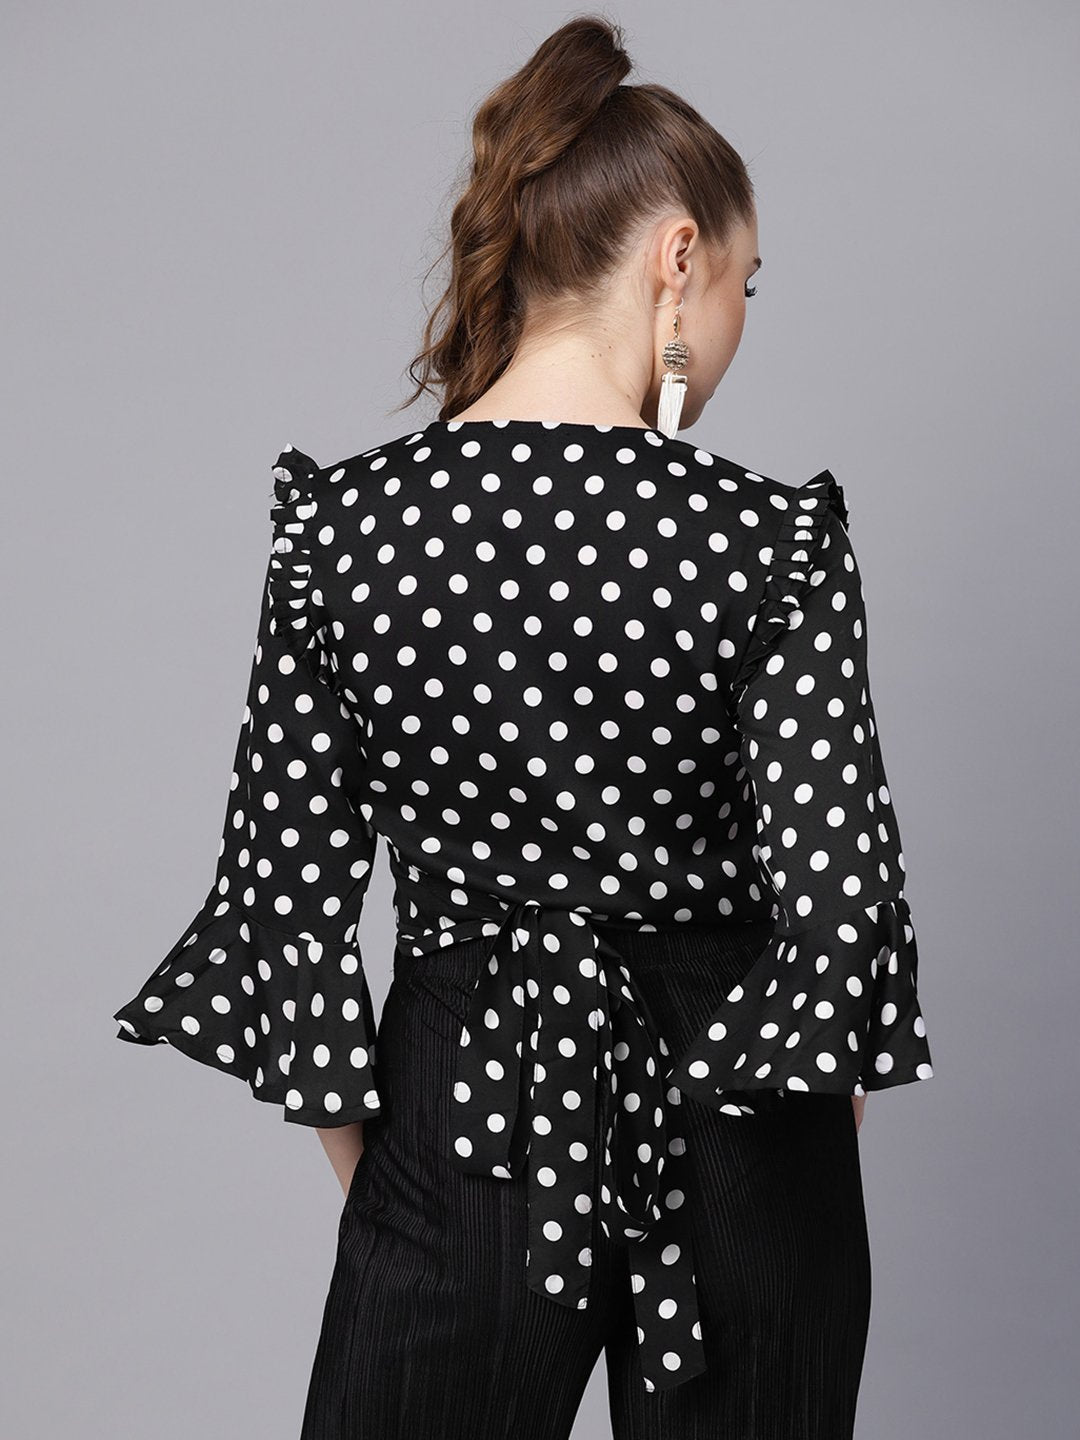 Women's Black Polka Dots Top With Detailed Sleeves & V-Neck - Nayo Clothing